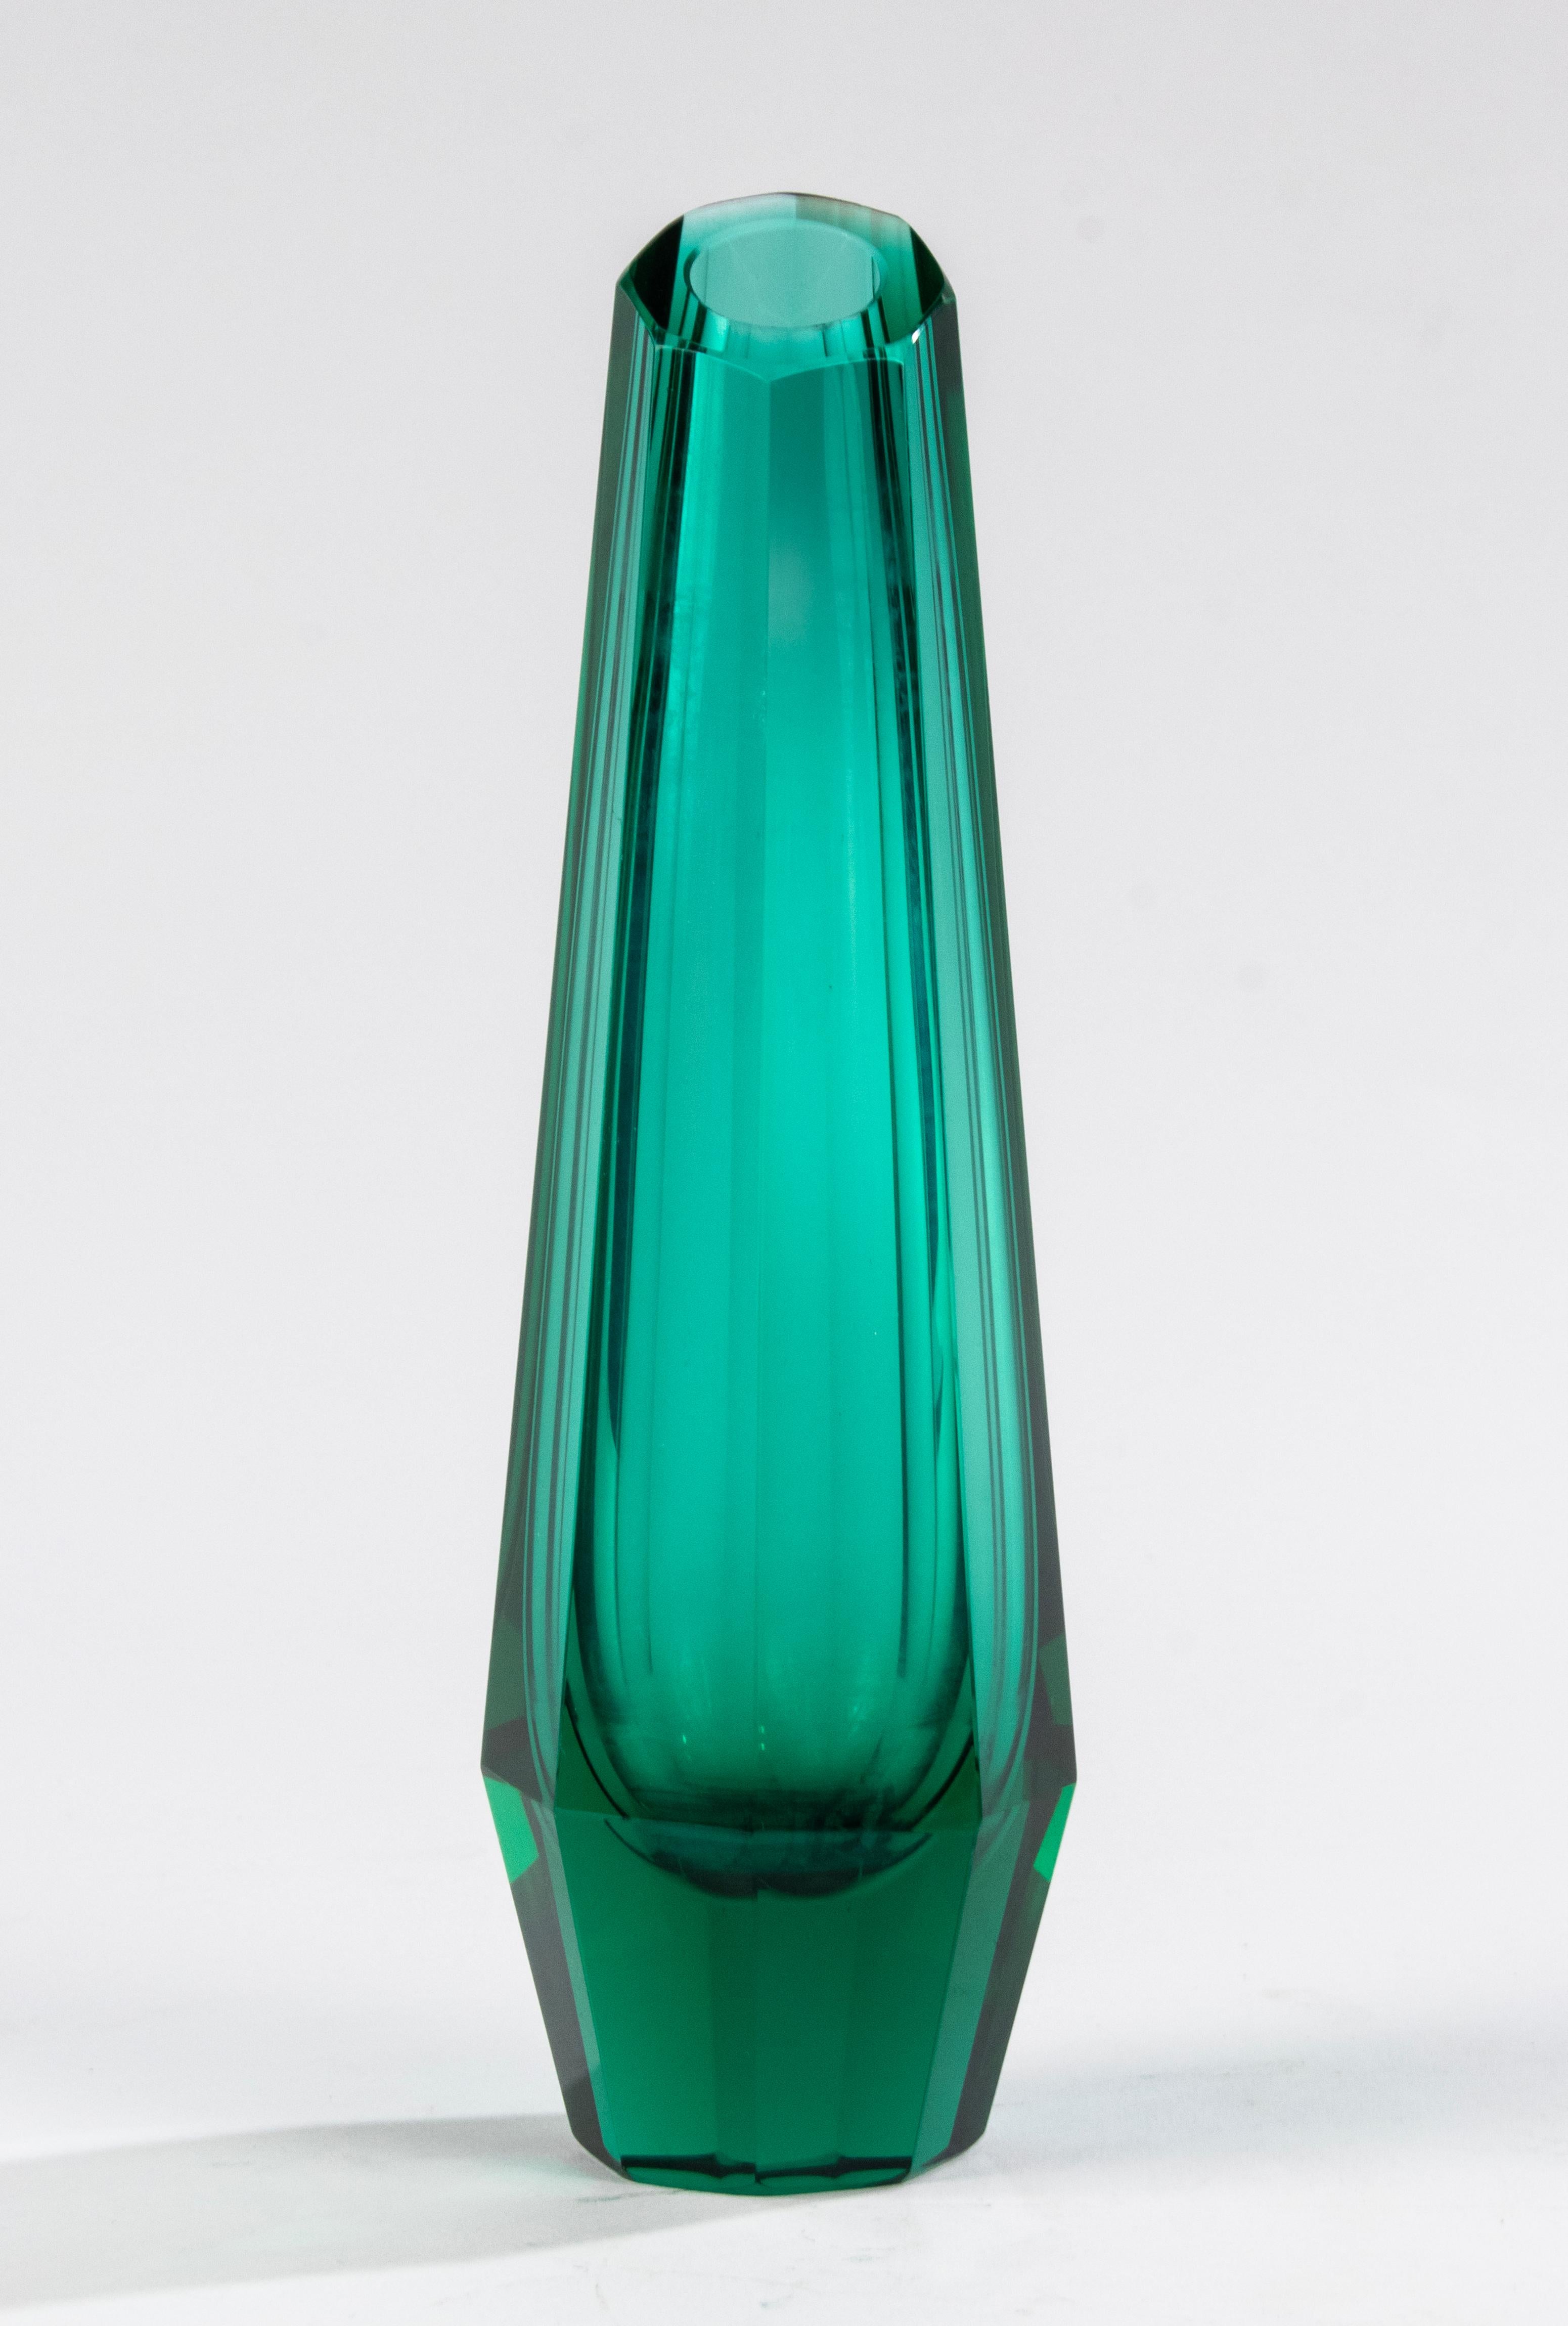 Hand-Carved 1930's Art Deco Crystal Vase - Attributed to Josef Hoffmann for Moser For Sale